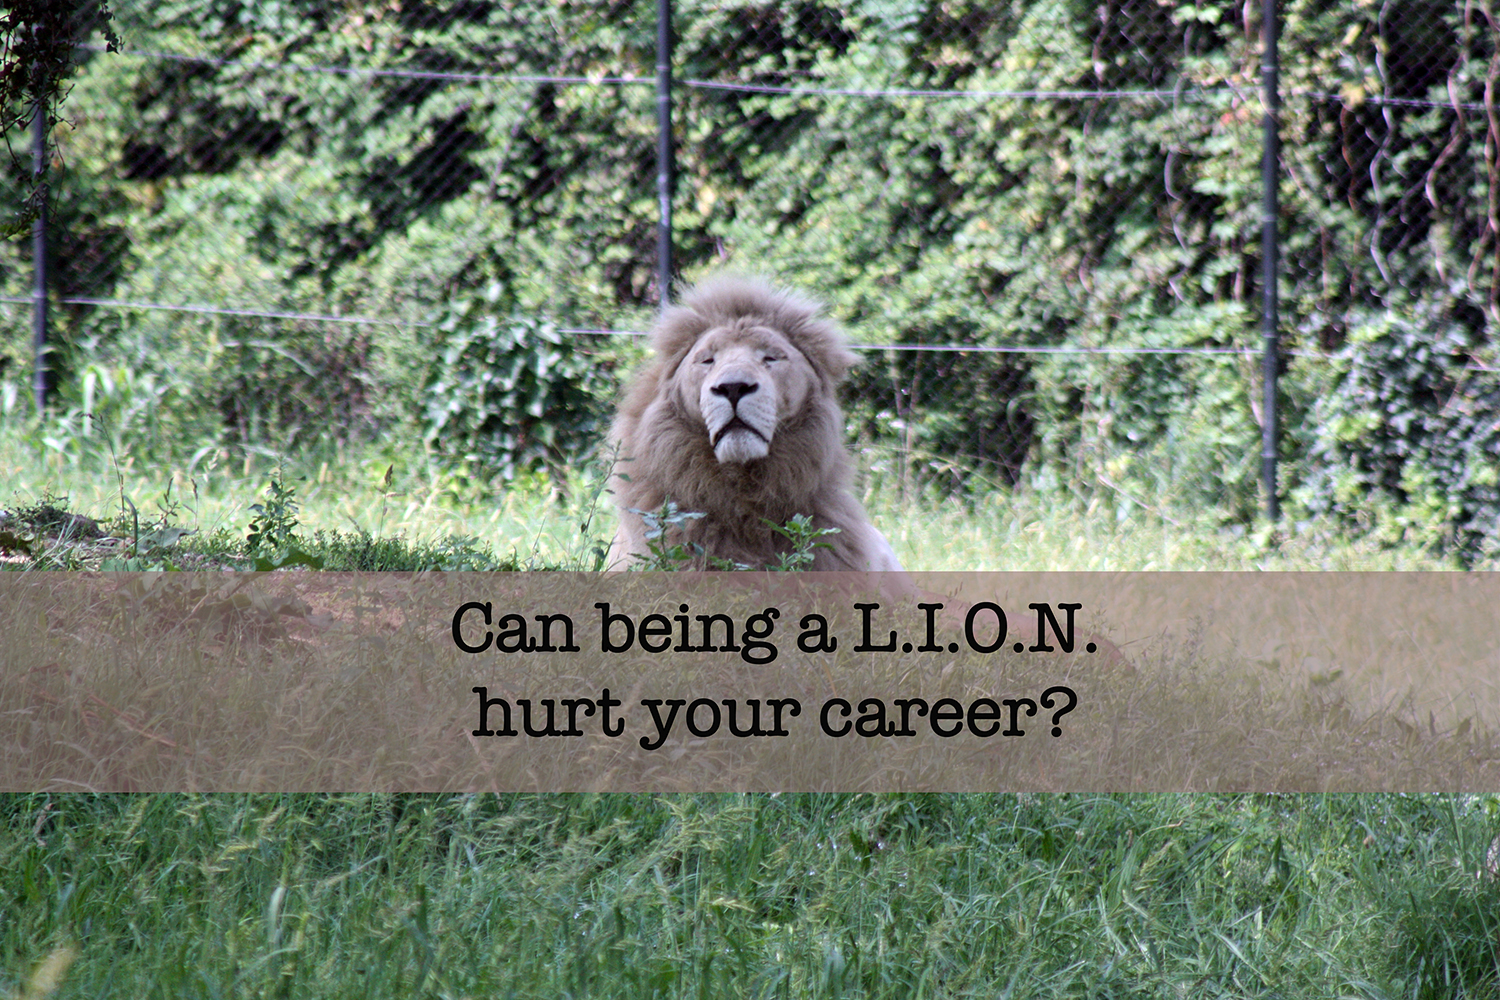 could being a L.I.O.N. hurt your career?